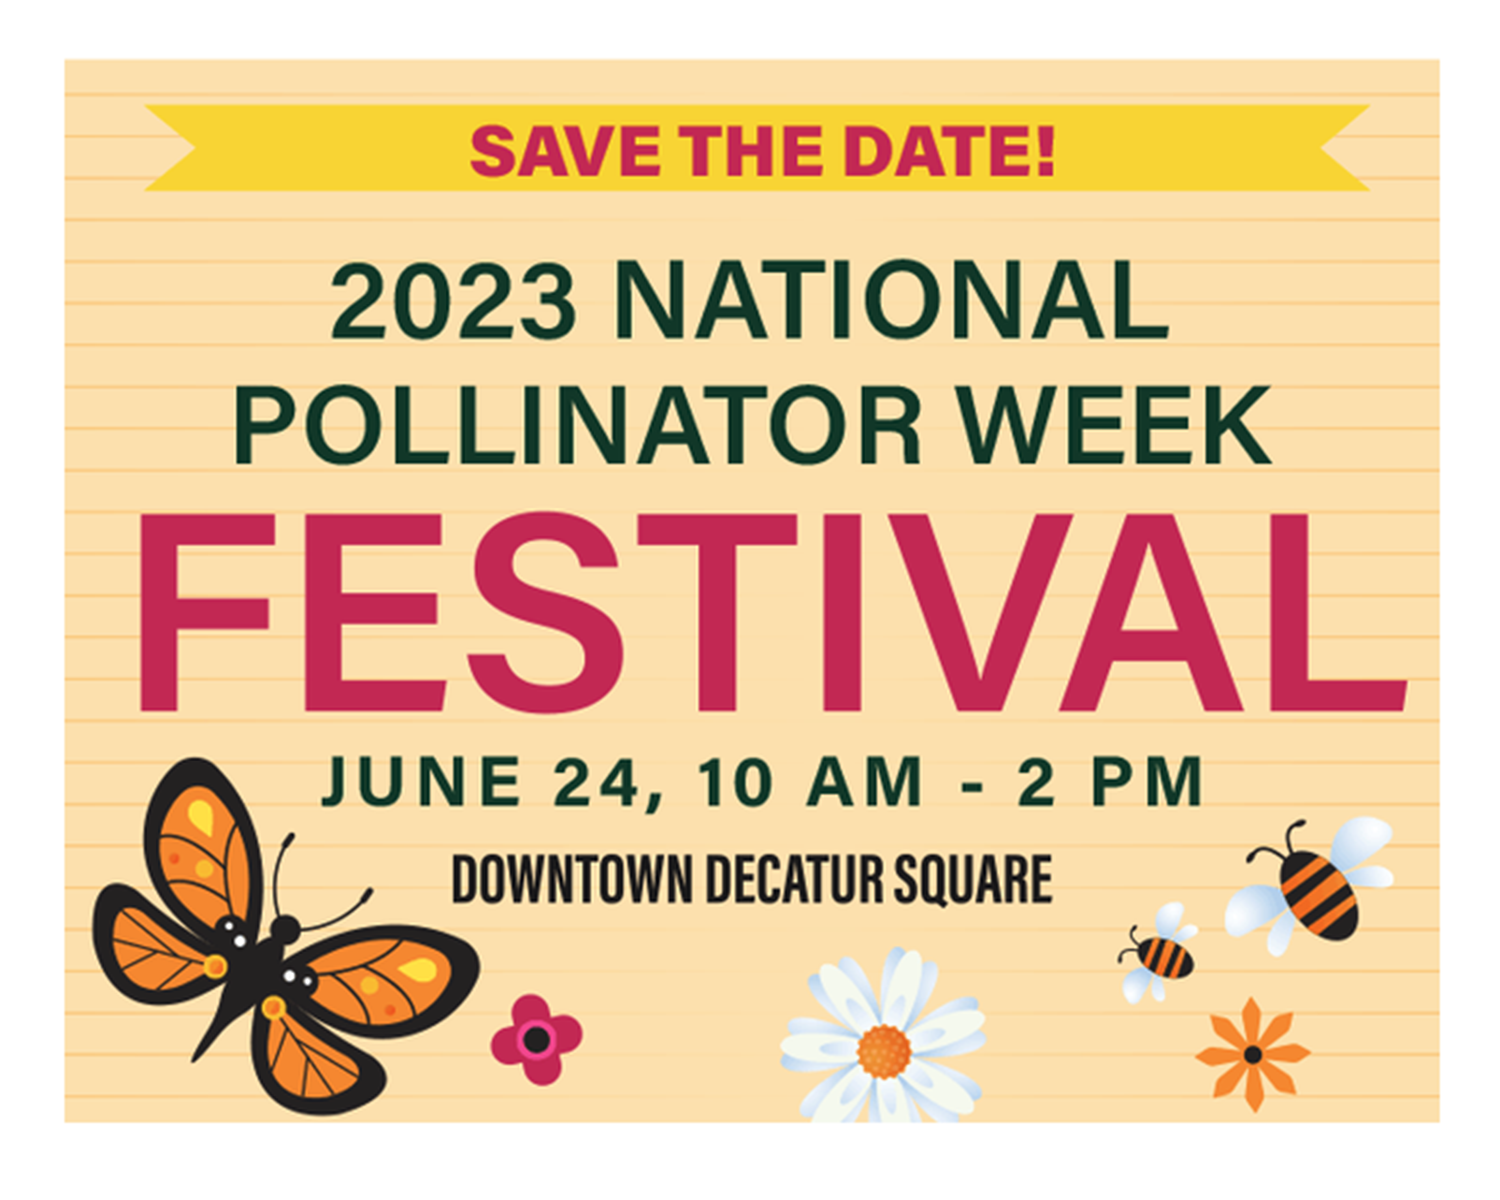 save the date! 2023 national pollinator week festival. june 24, 10am-2pm. downtown decatur square